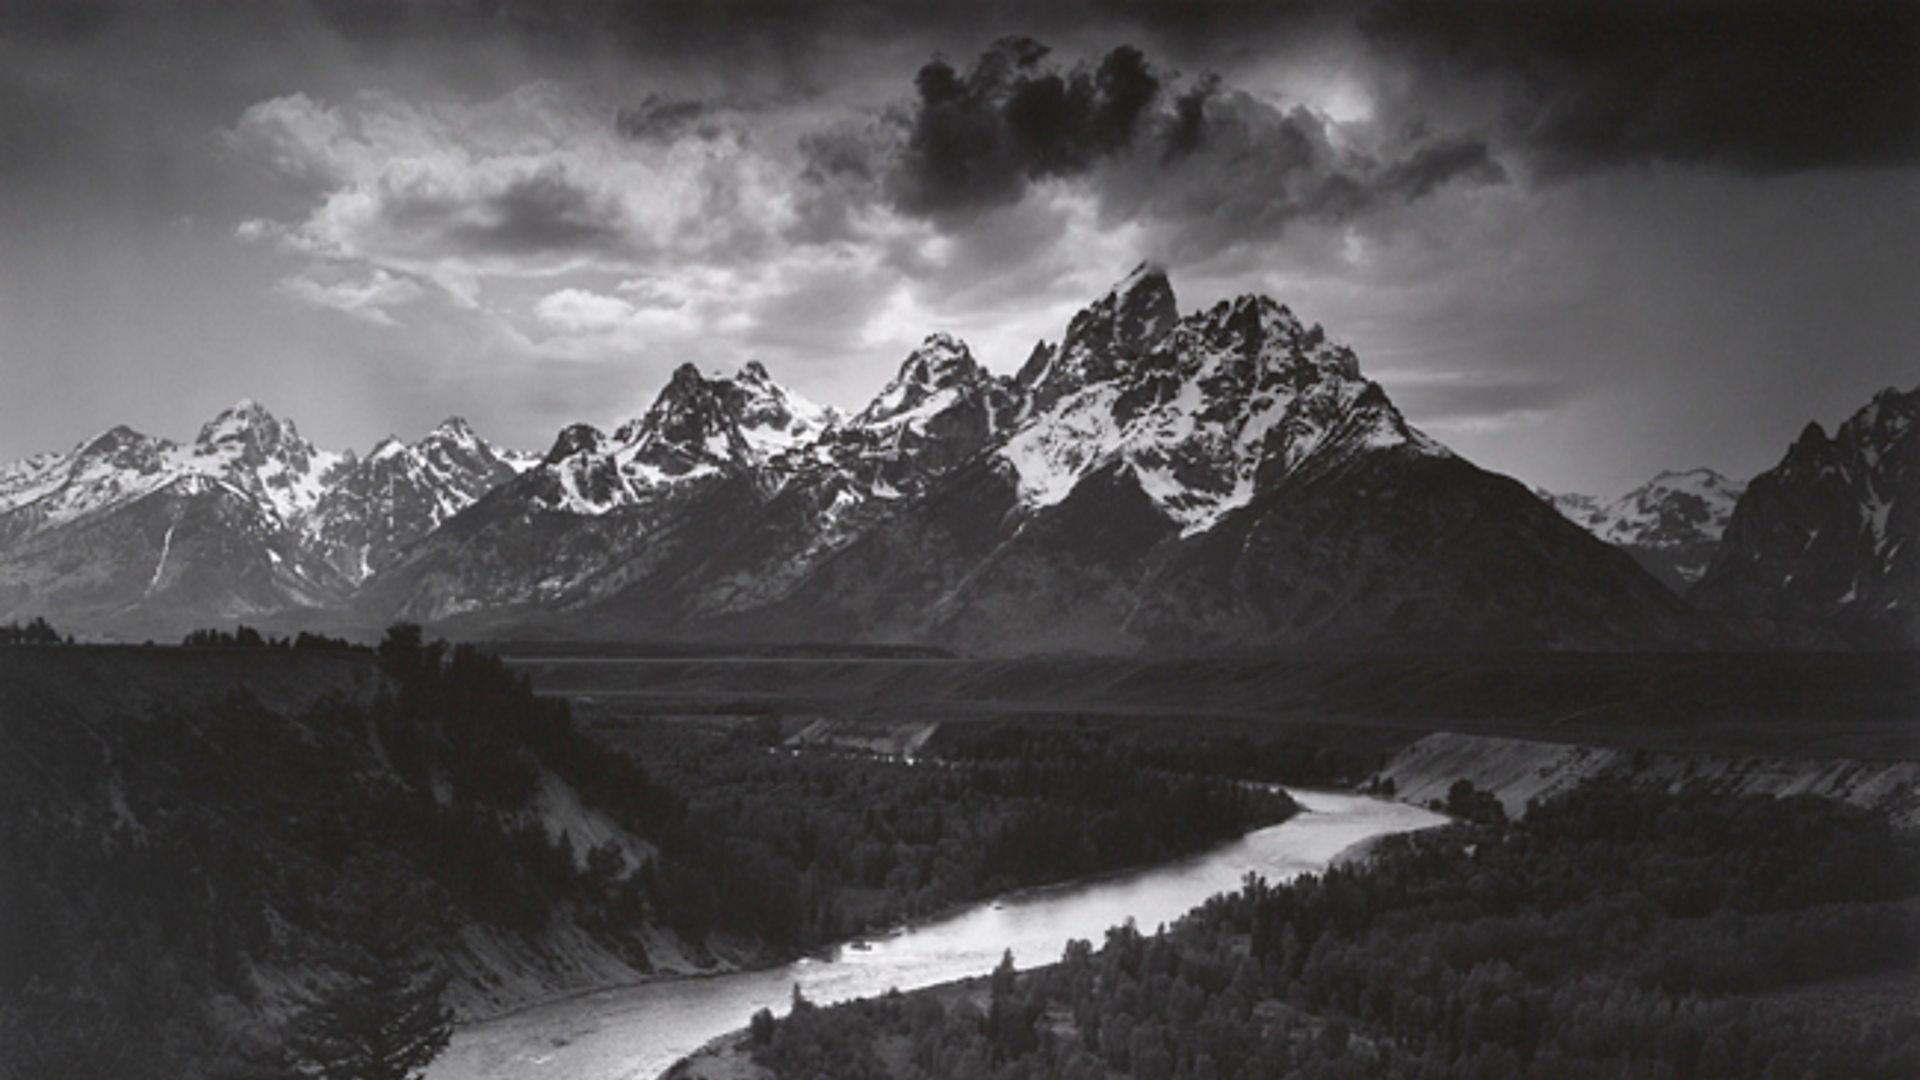 BBC - Ansel Adams: Exploring the inner lens of the imagination